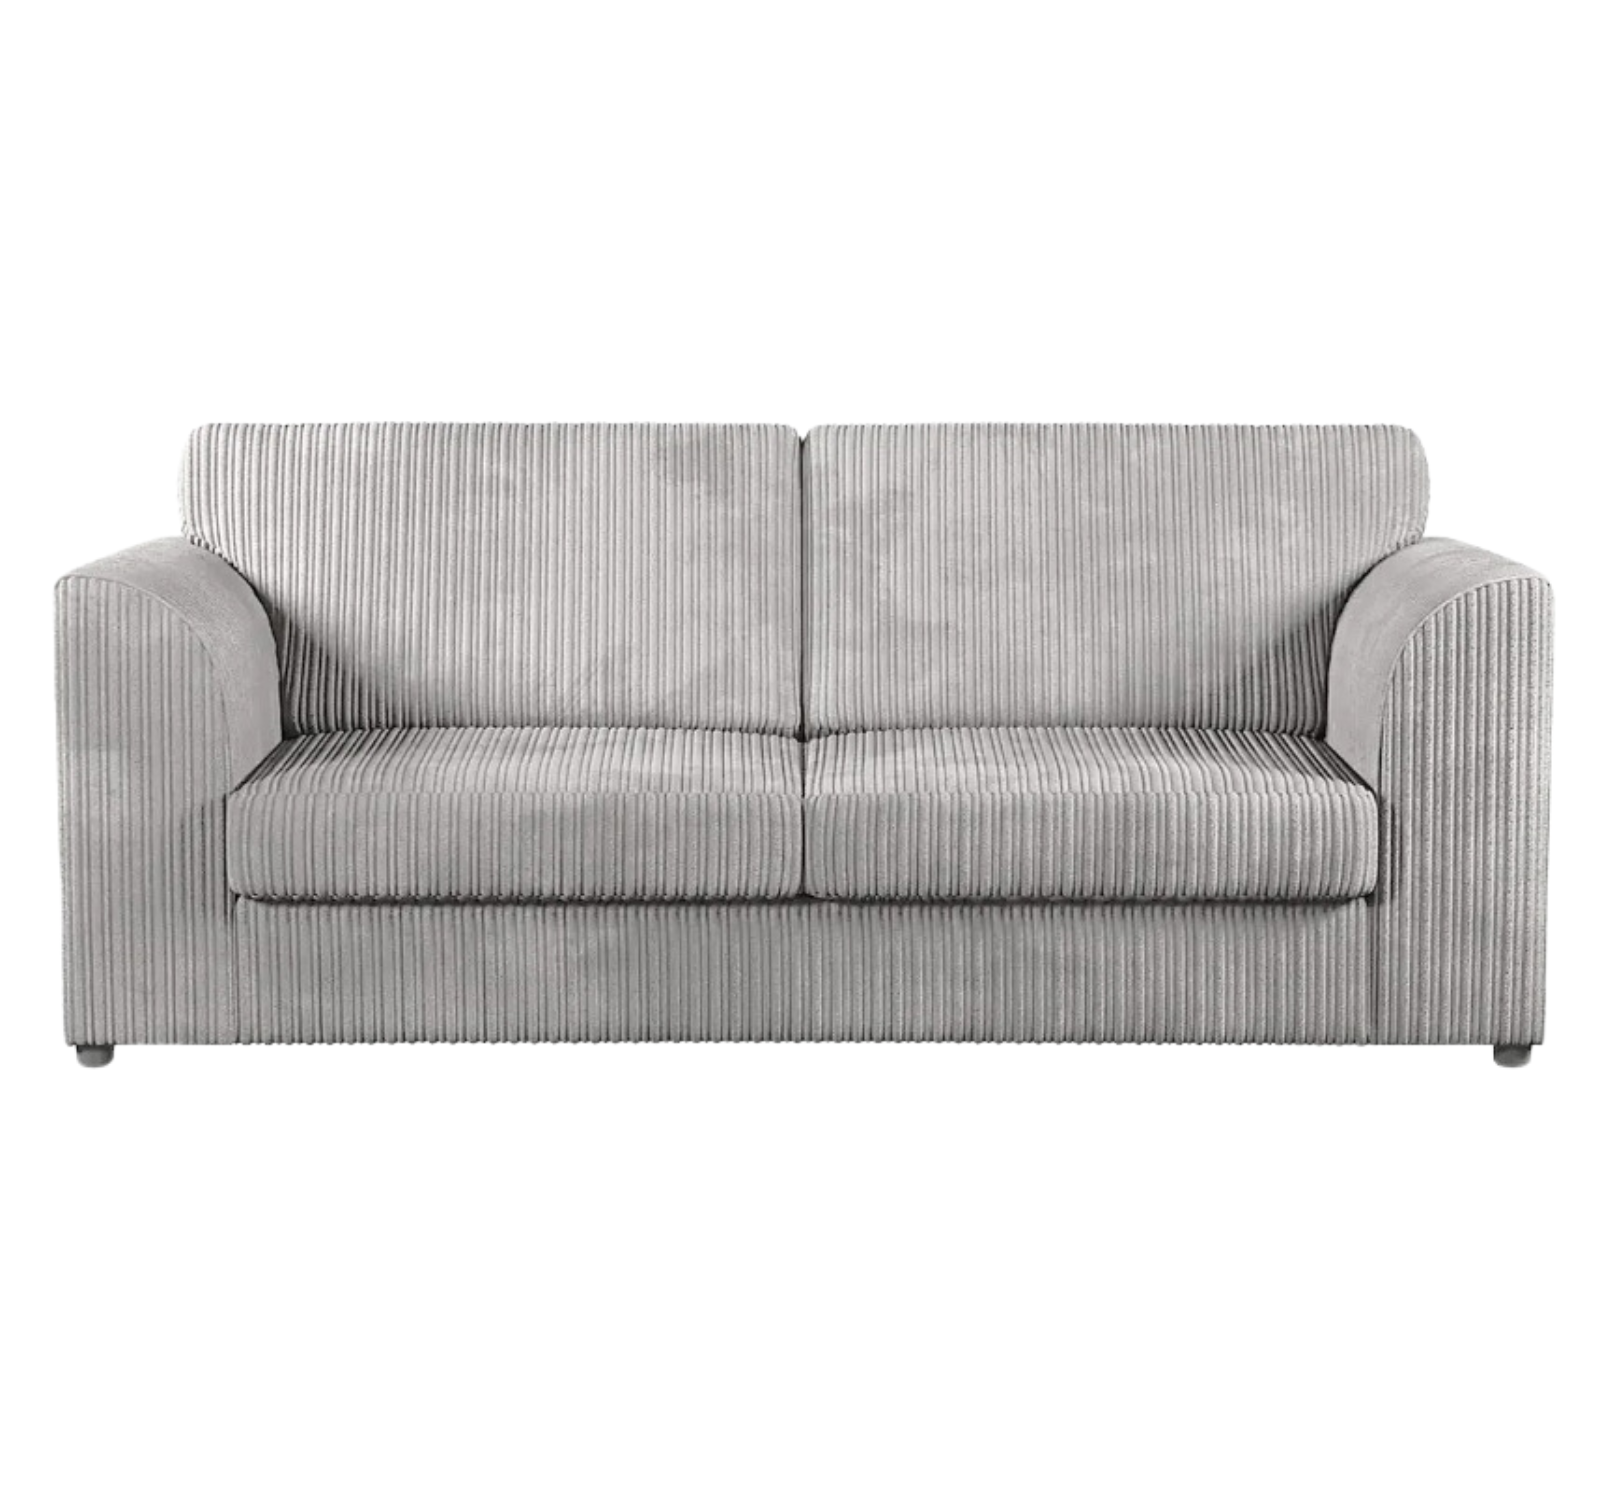 Jumbo Cord 3 Seater Sofa, The Perfect Combination Of Comfort (High Back)